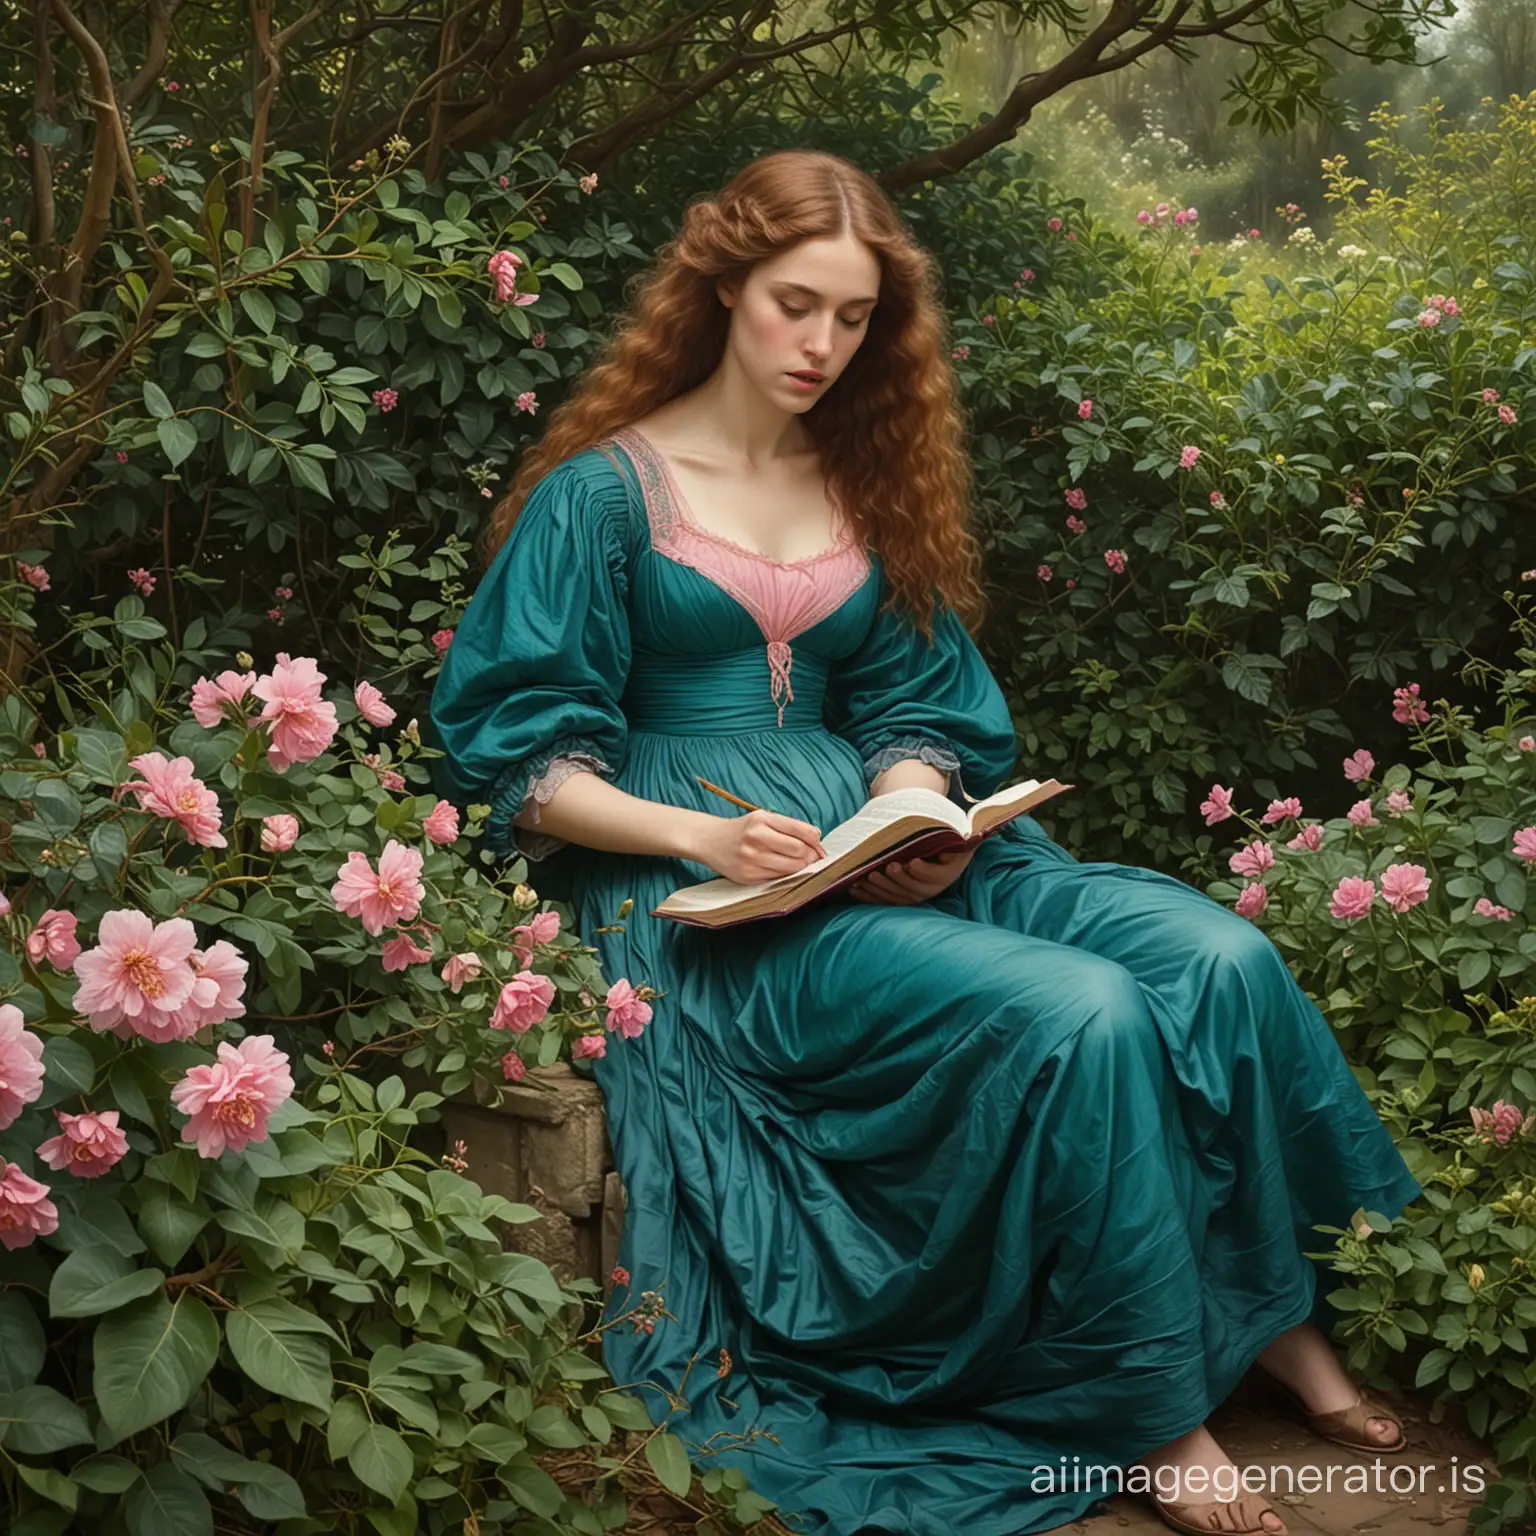 Romantic-Young-Woman-in-Turquoise-Dress-Reading-in-Sunlit-Garden